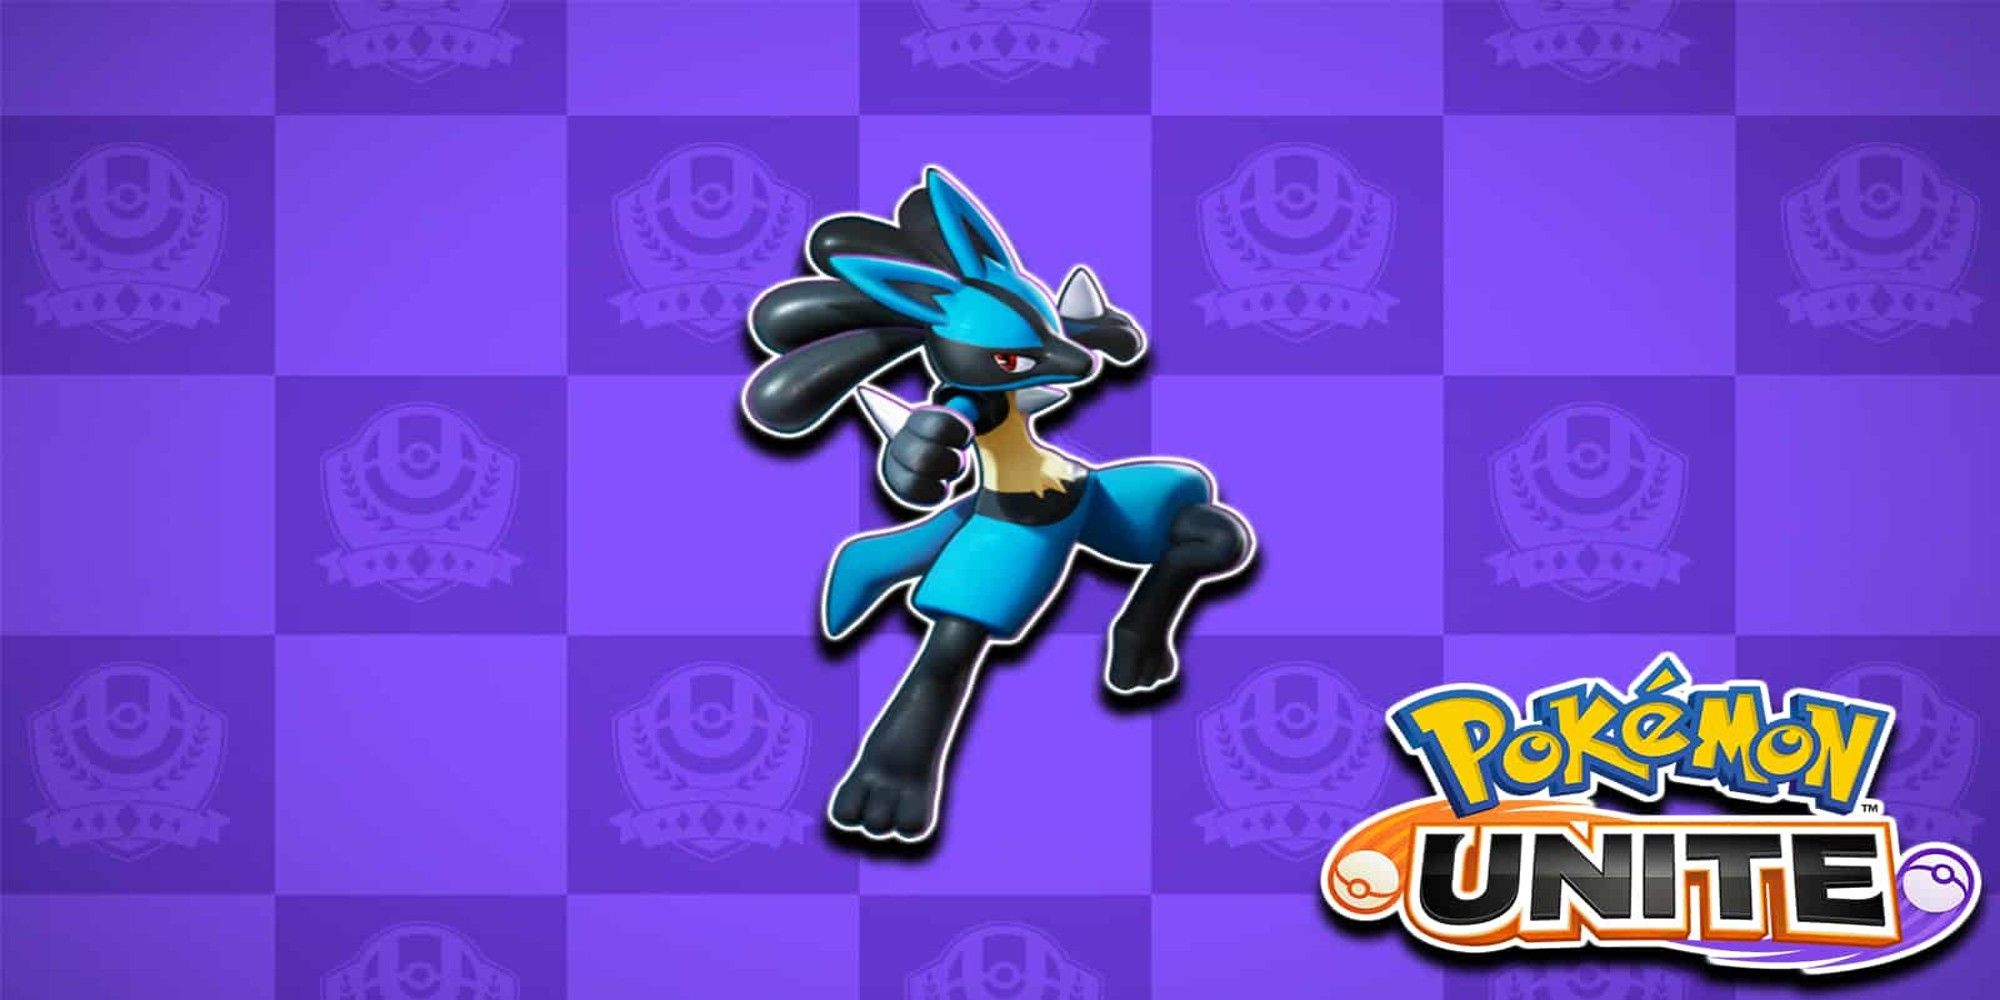 Lucario can be built as an all-rounder in Pokémon Unite